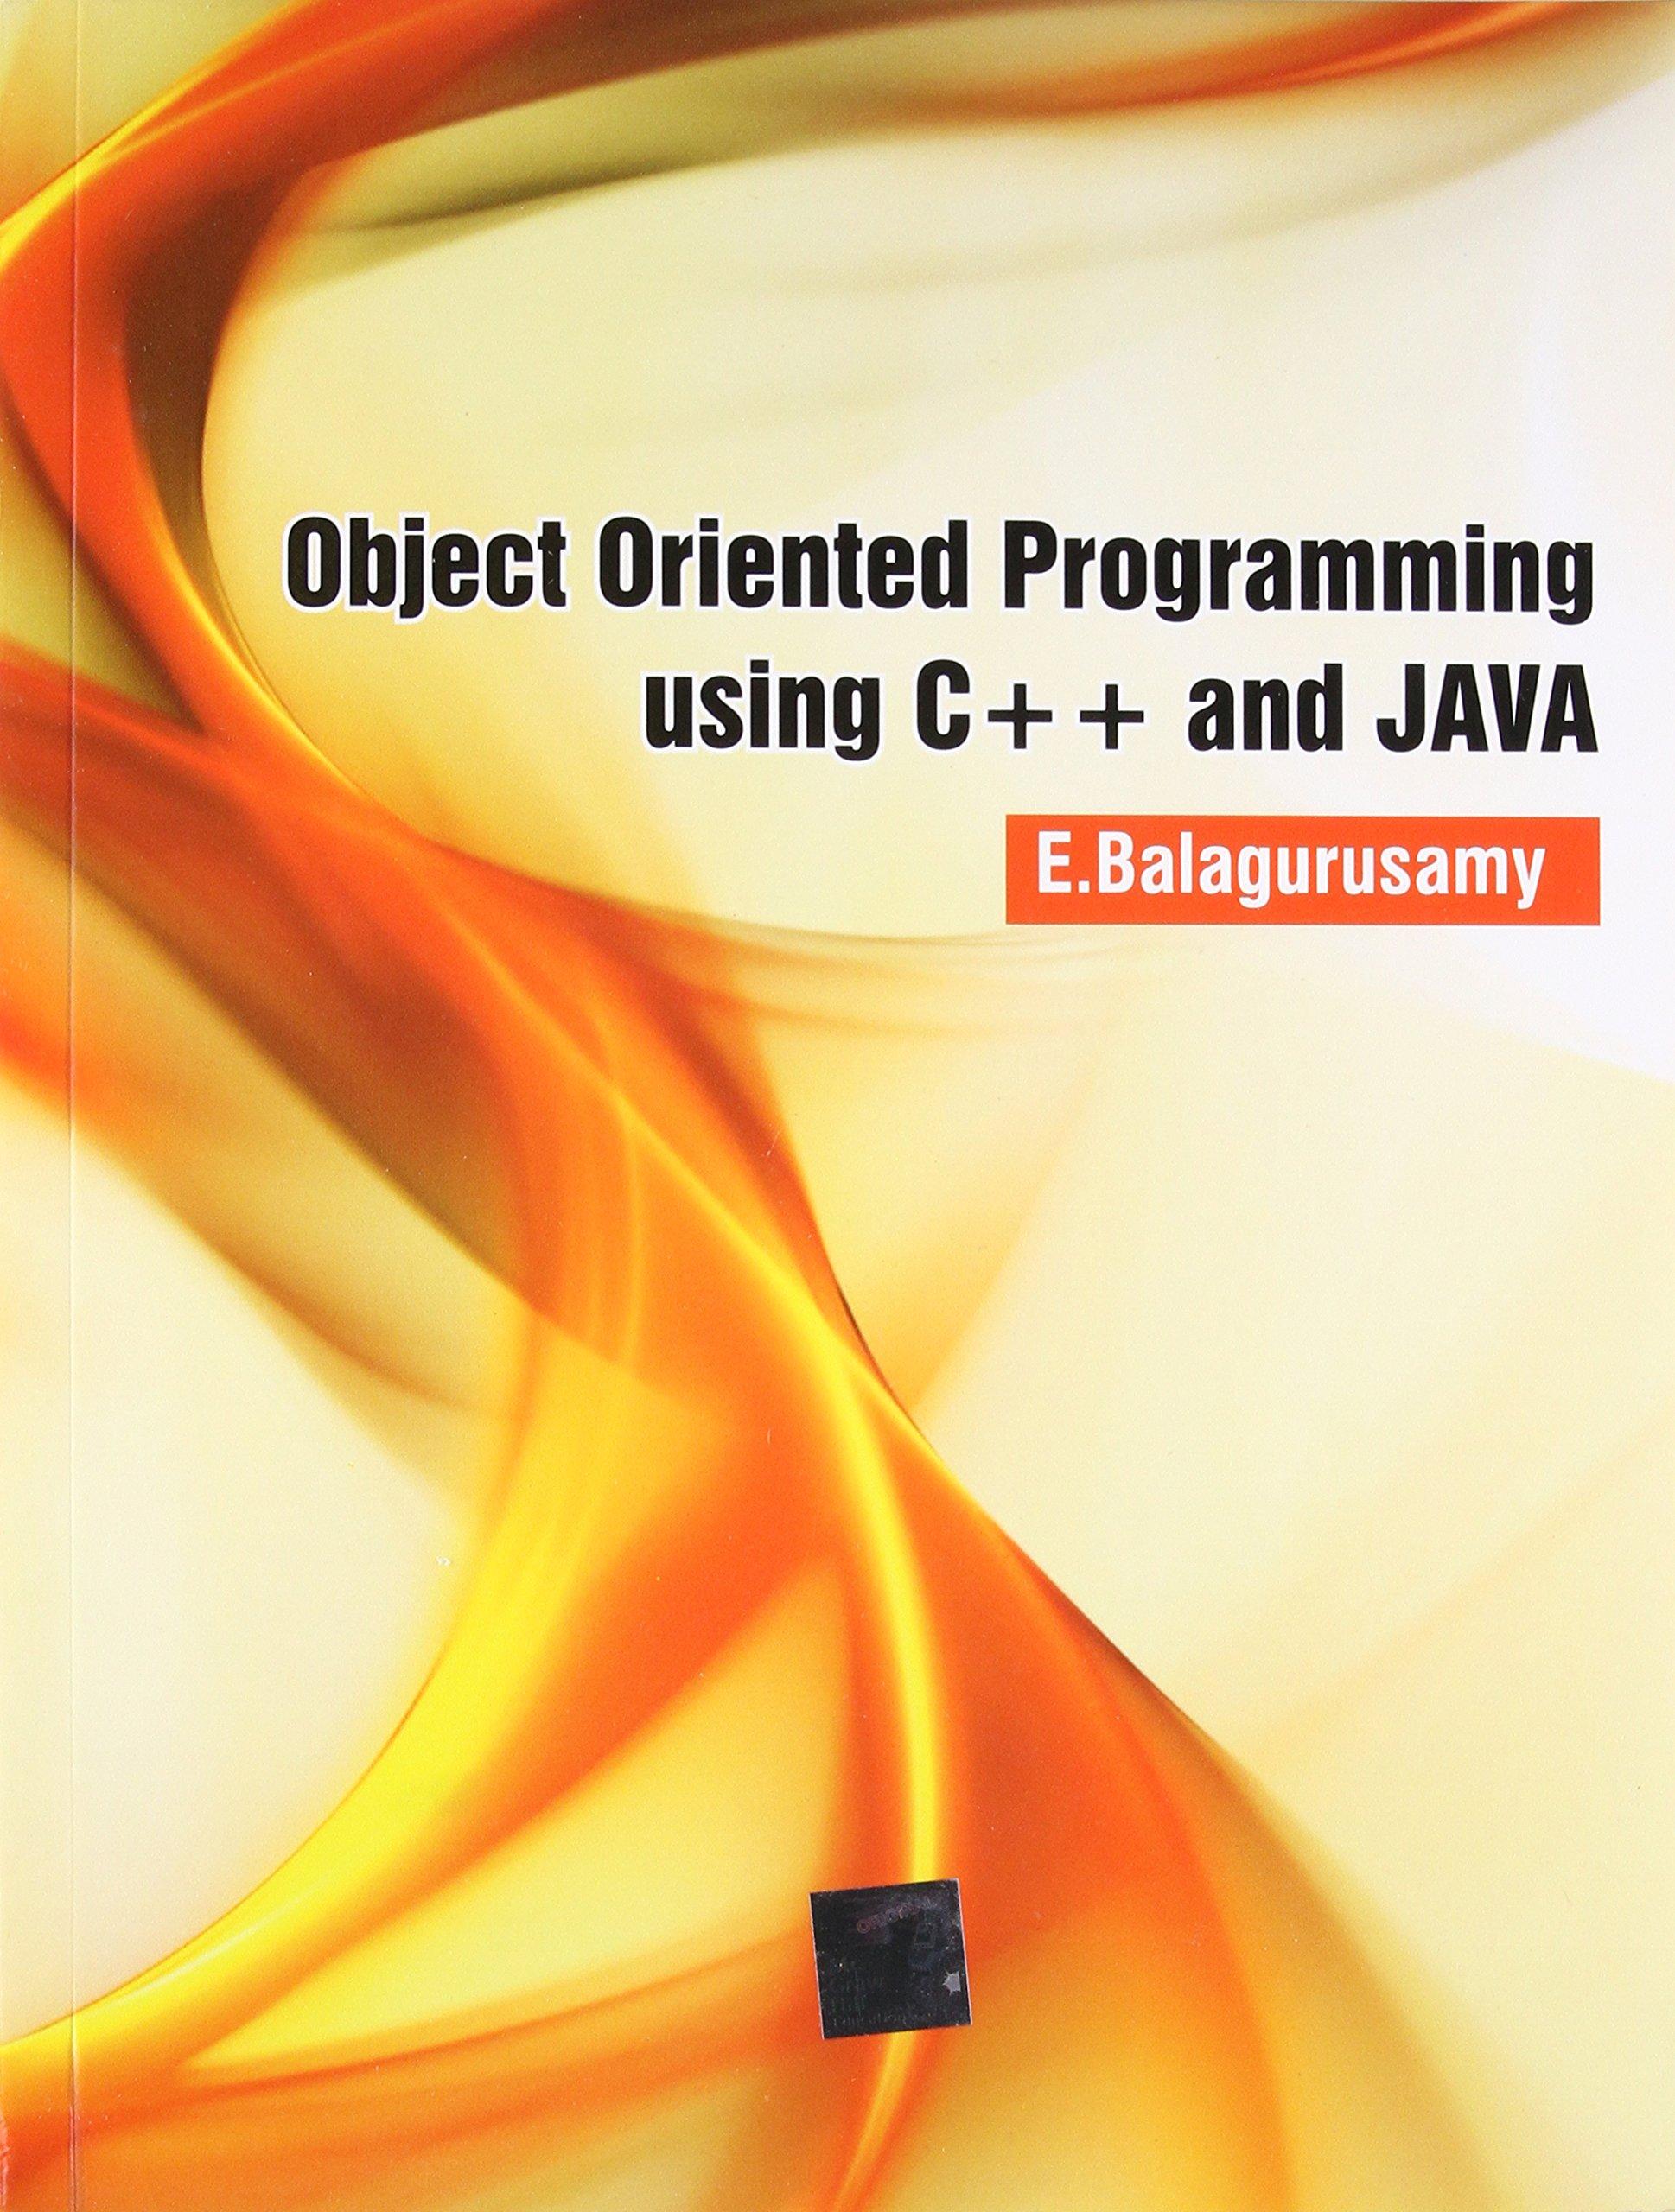 Object Oriented Programming Using C++ And JAVA